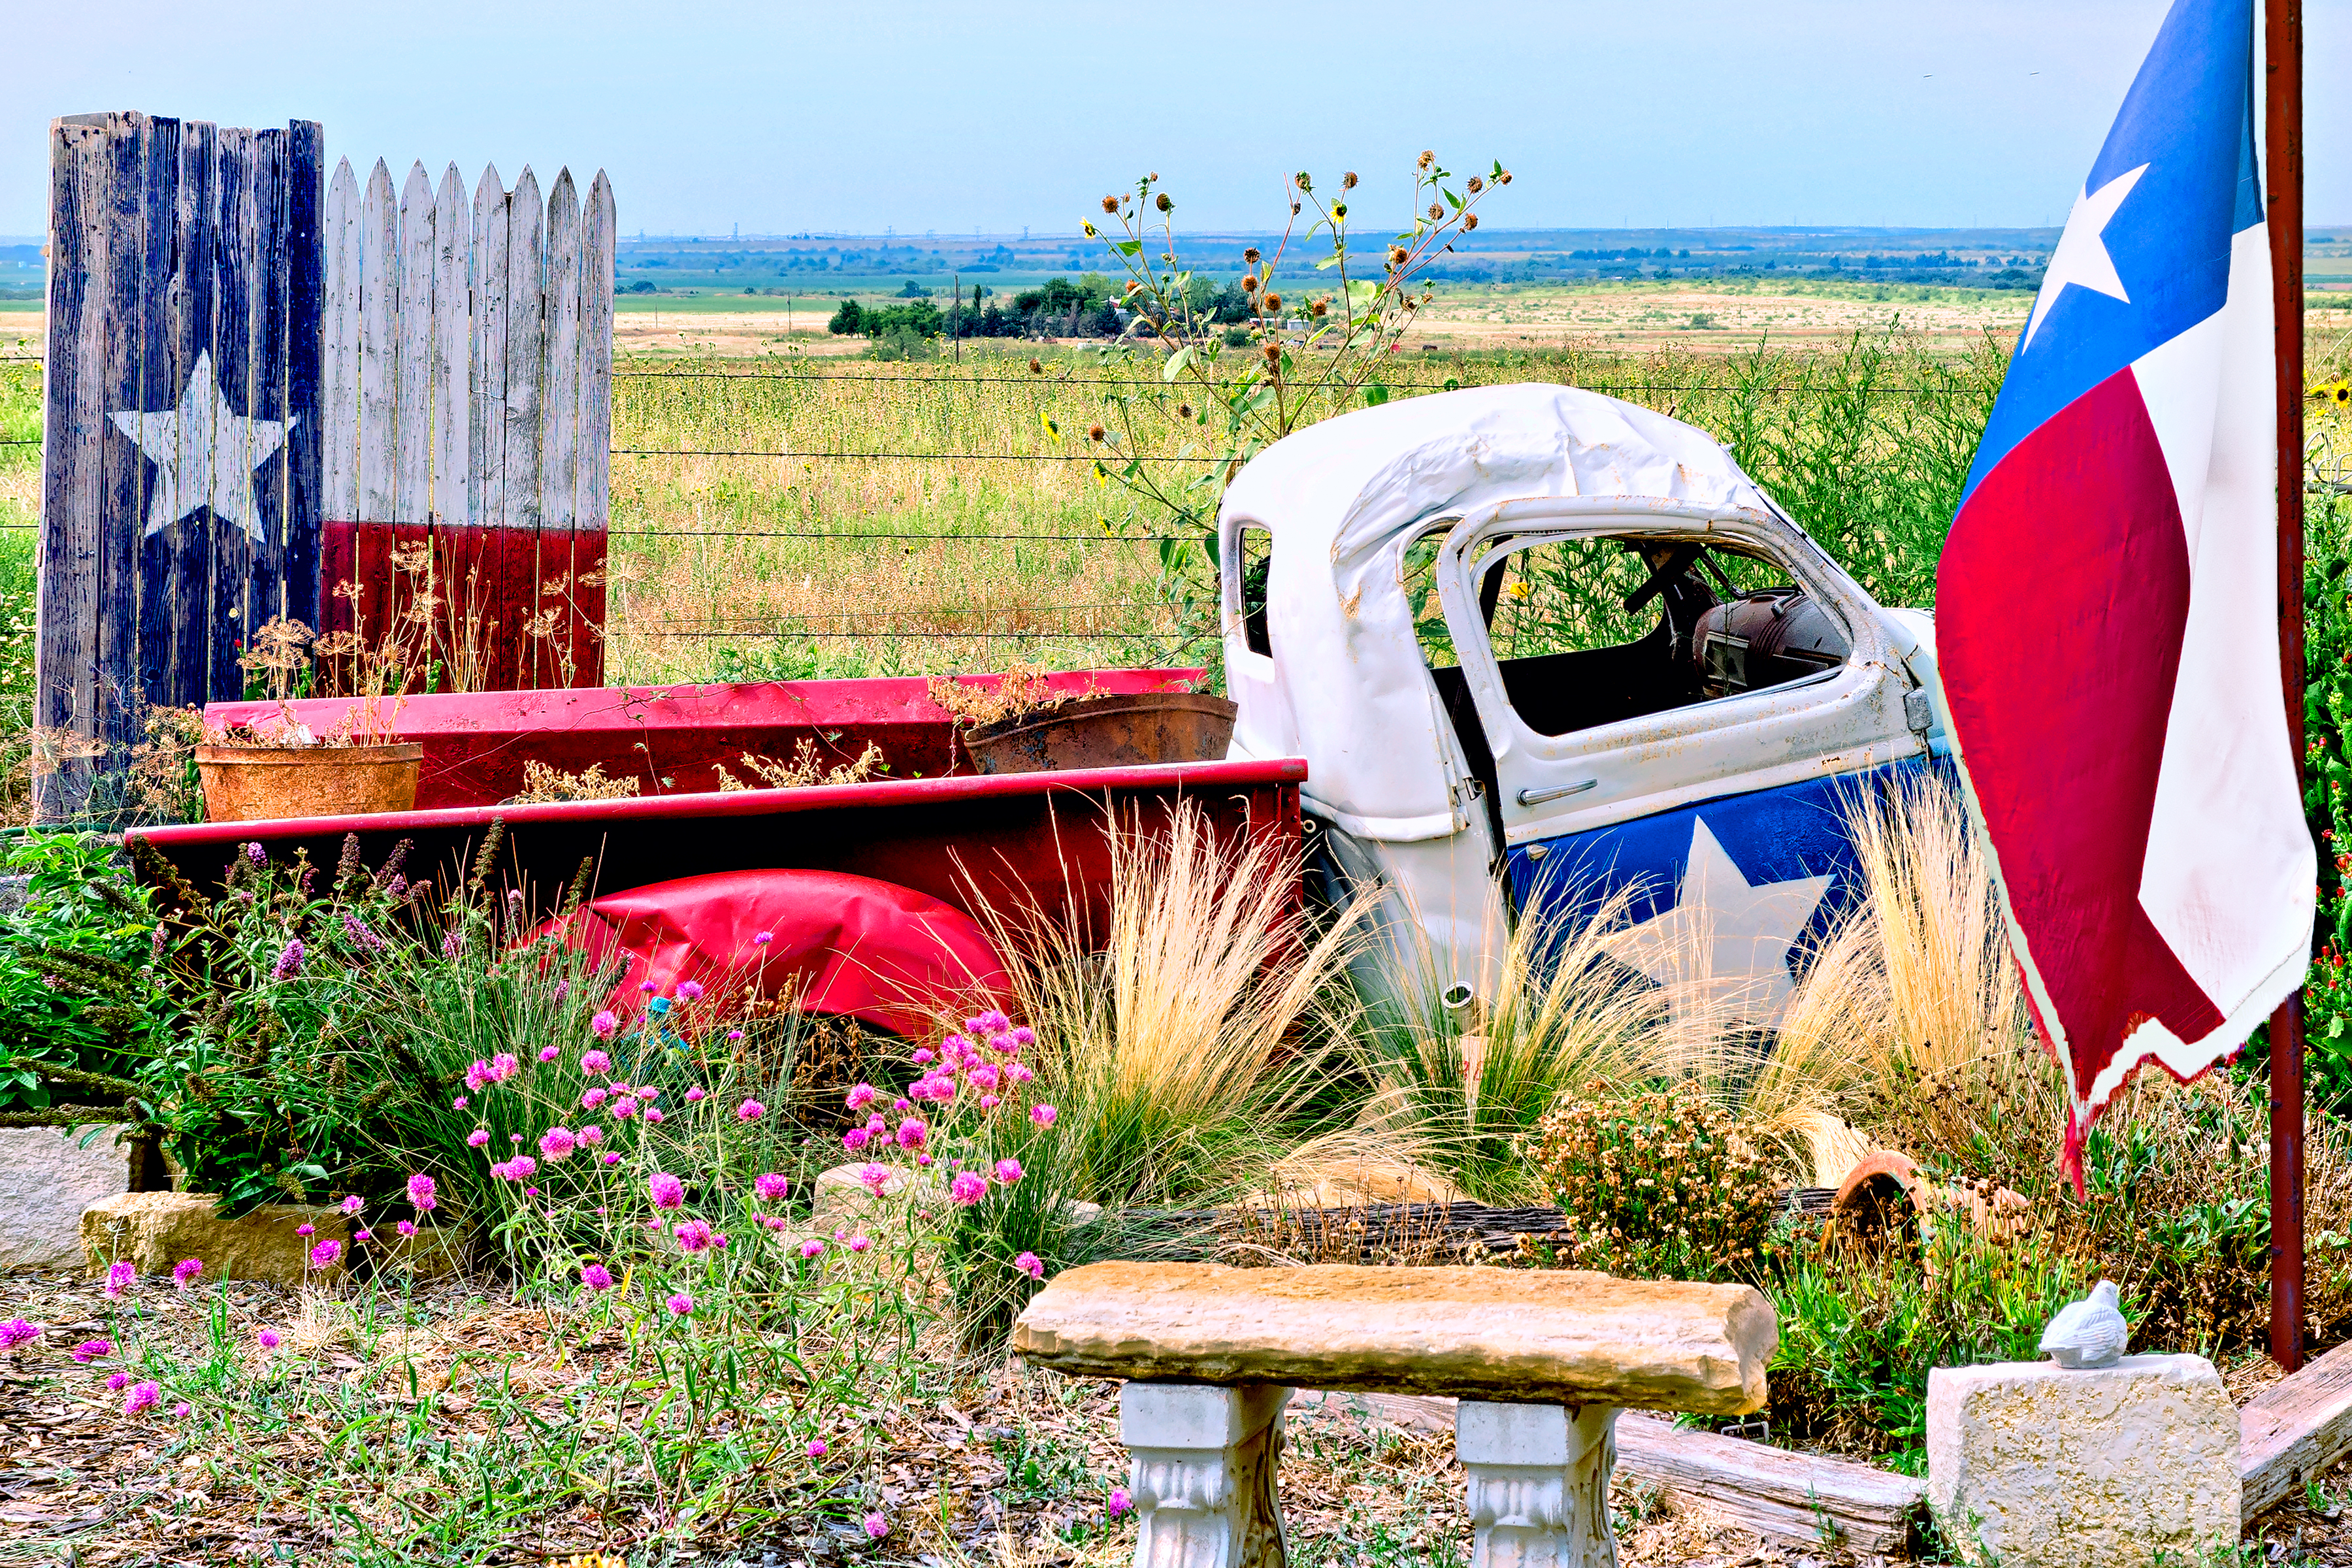 OLE' TEX - That was the name of this old truck used as a garden sculpture at the entrance to a ranch in Texas.